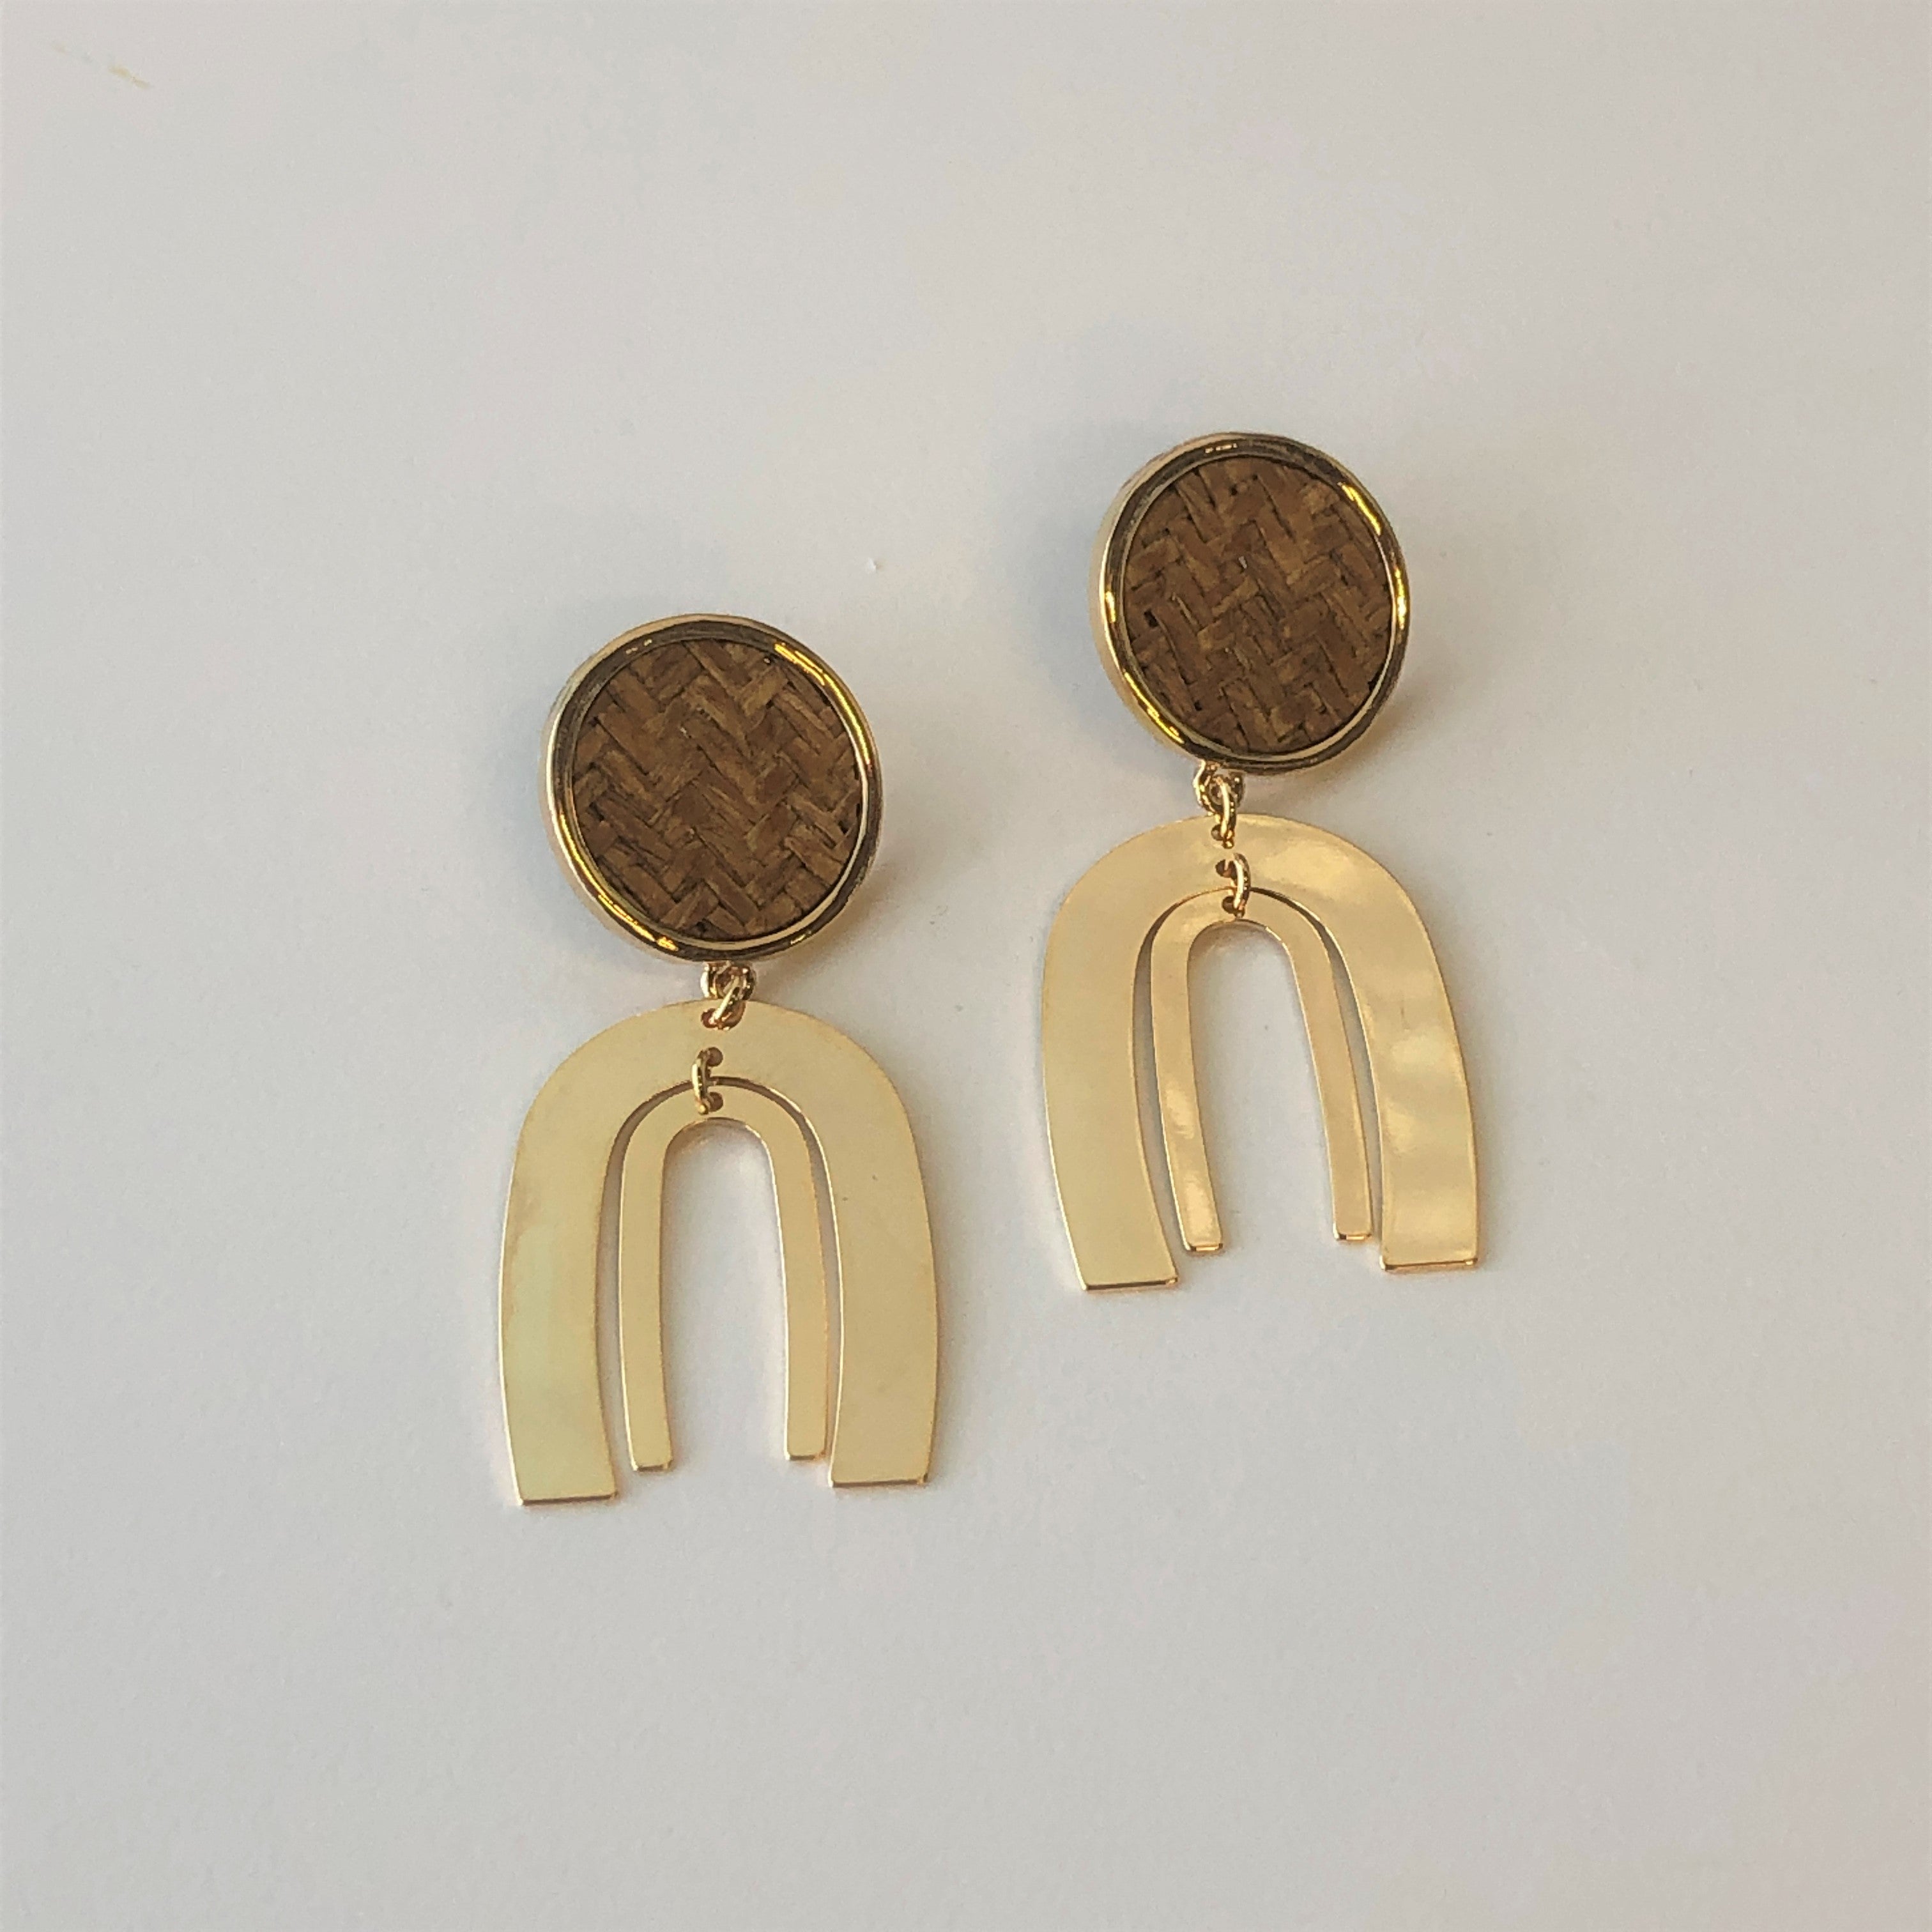 Gold and Woven Drop Earrings - FINAL SALE